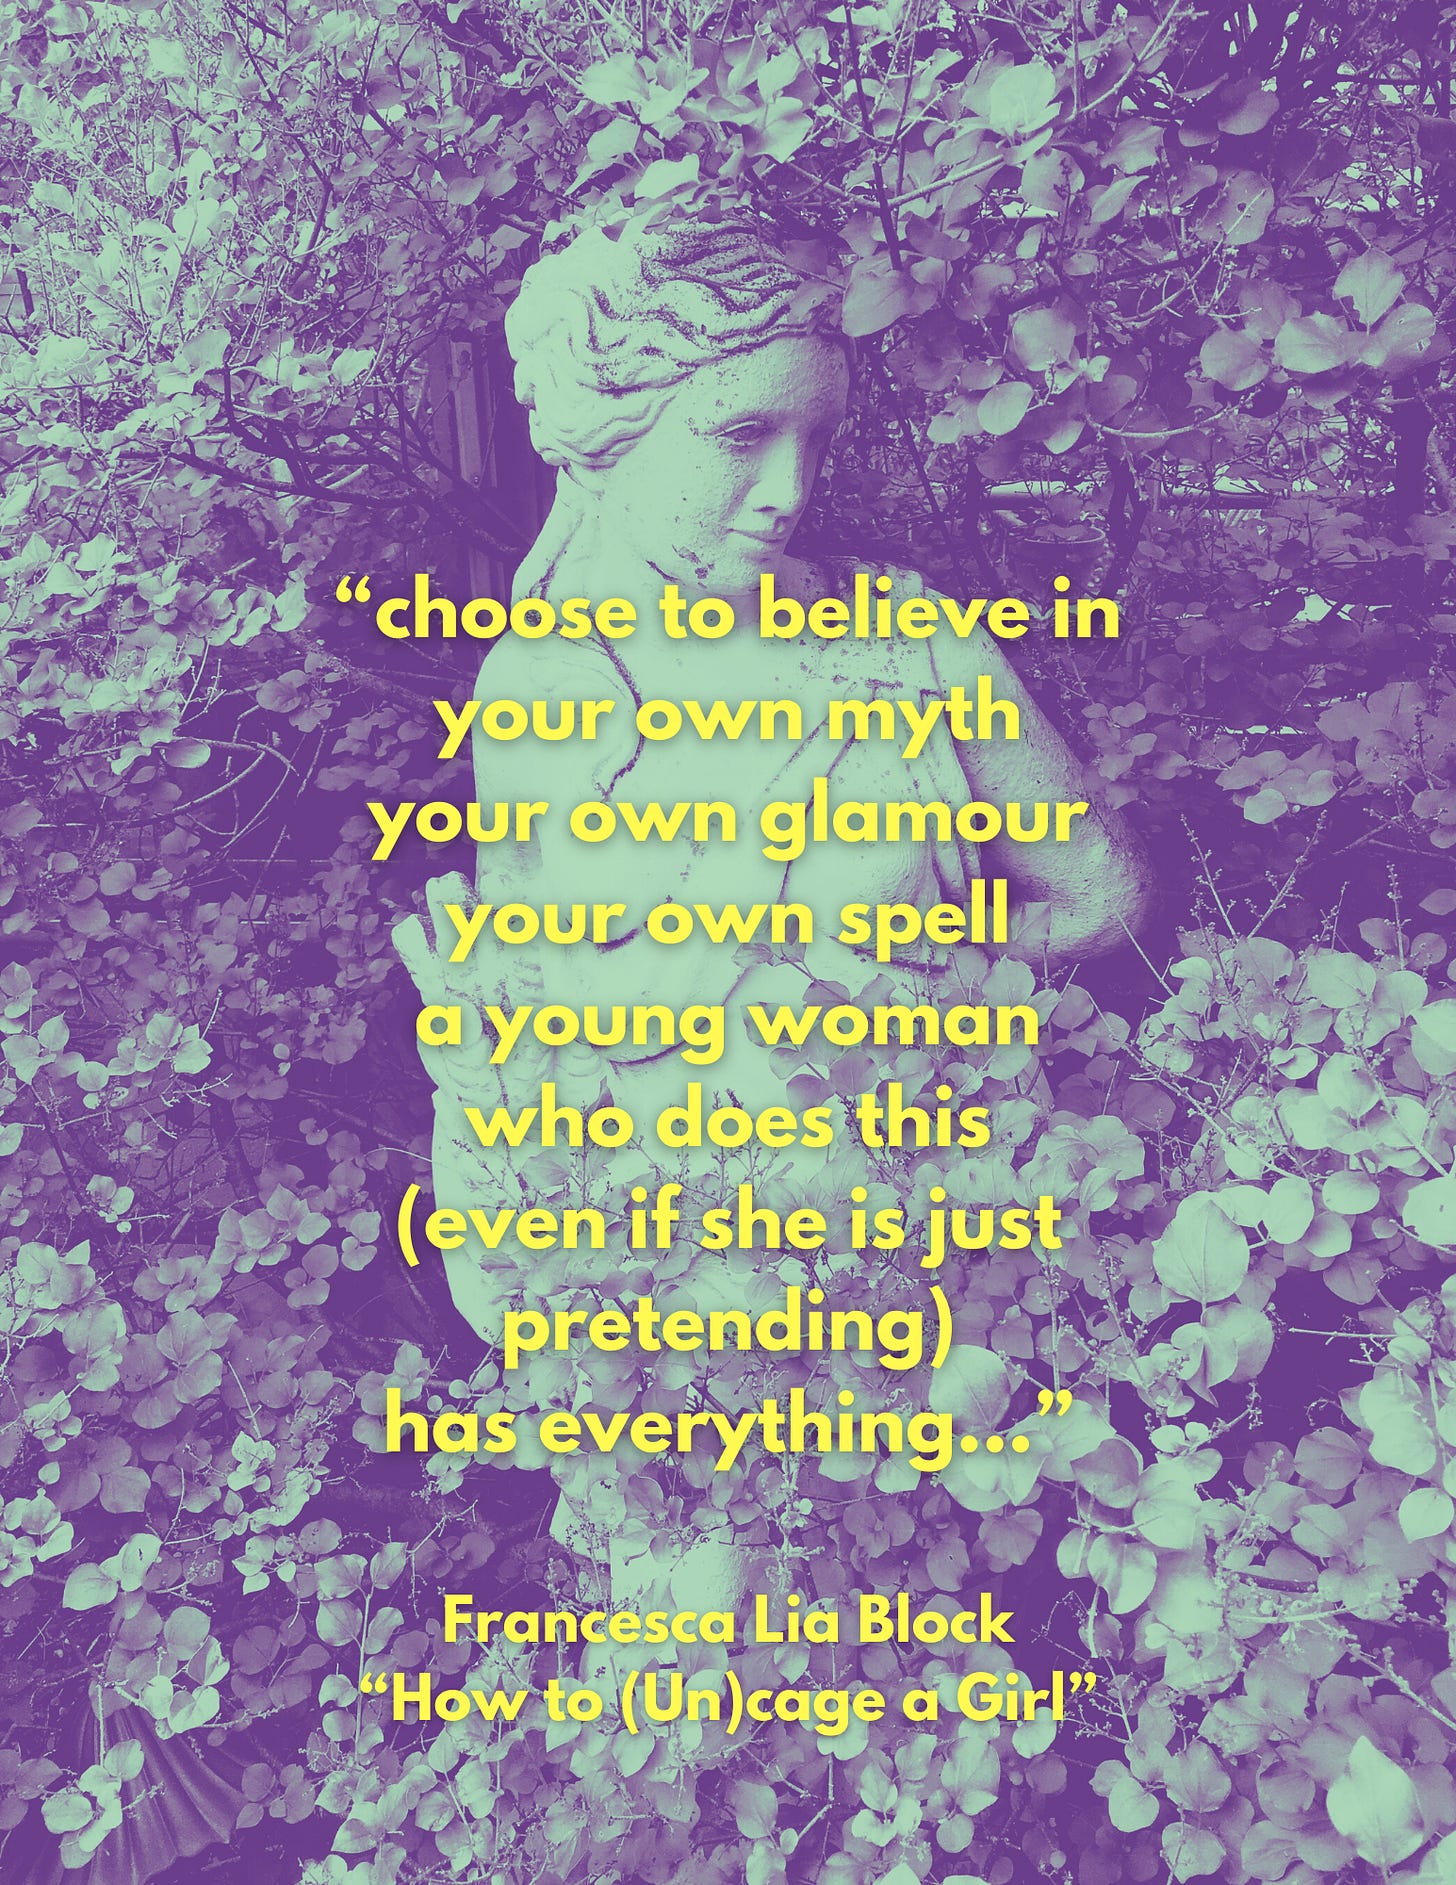 A Francesca Lia Block quote in yellow text on top of a photo of a statue, tinted purple and green